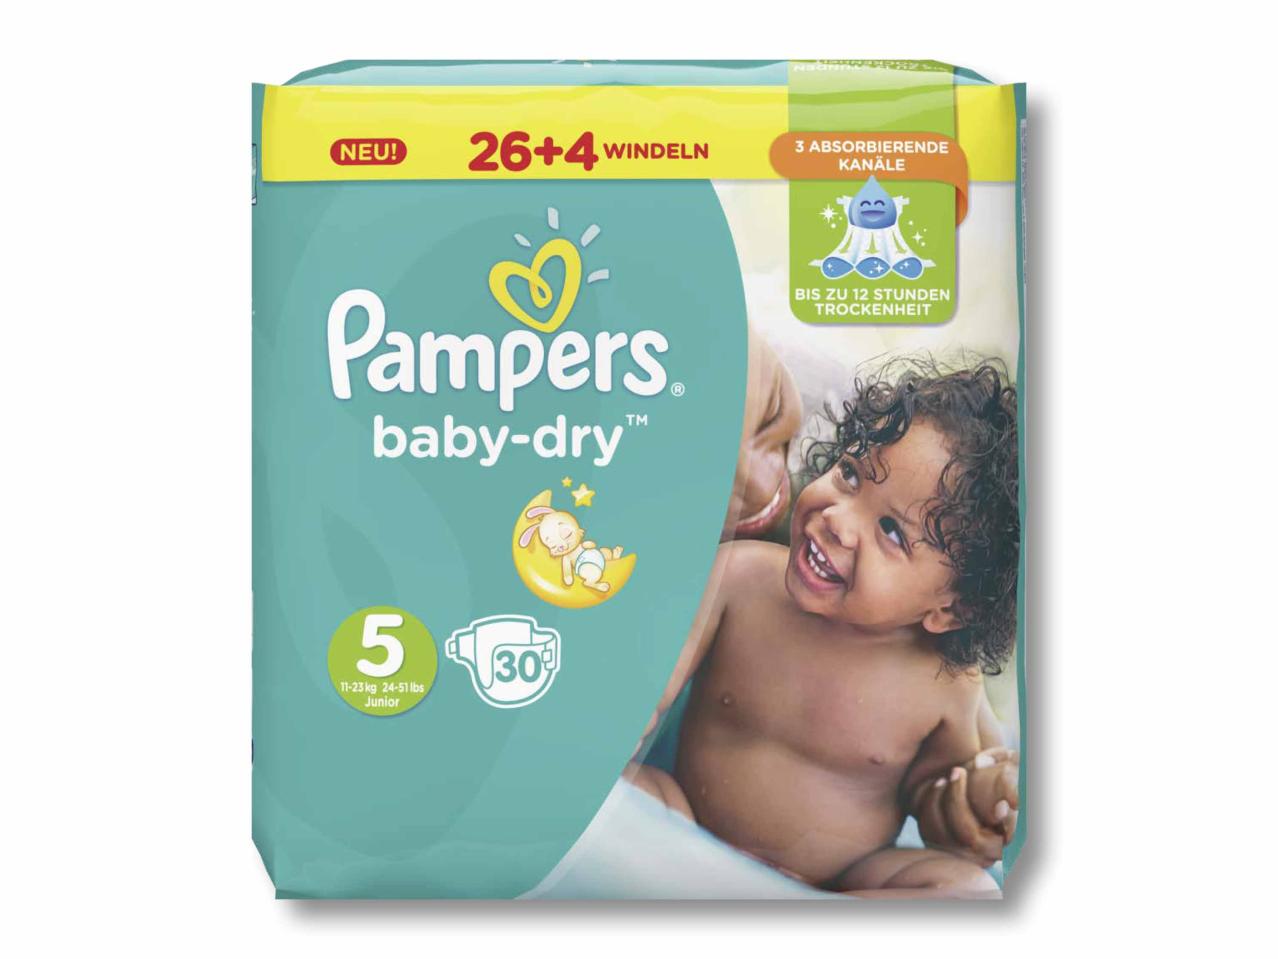 Pampers Windeln Baby-dry